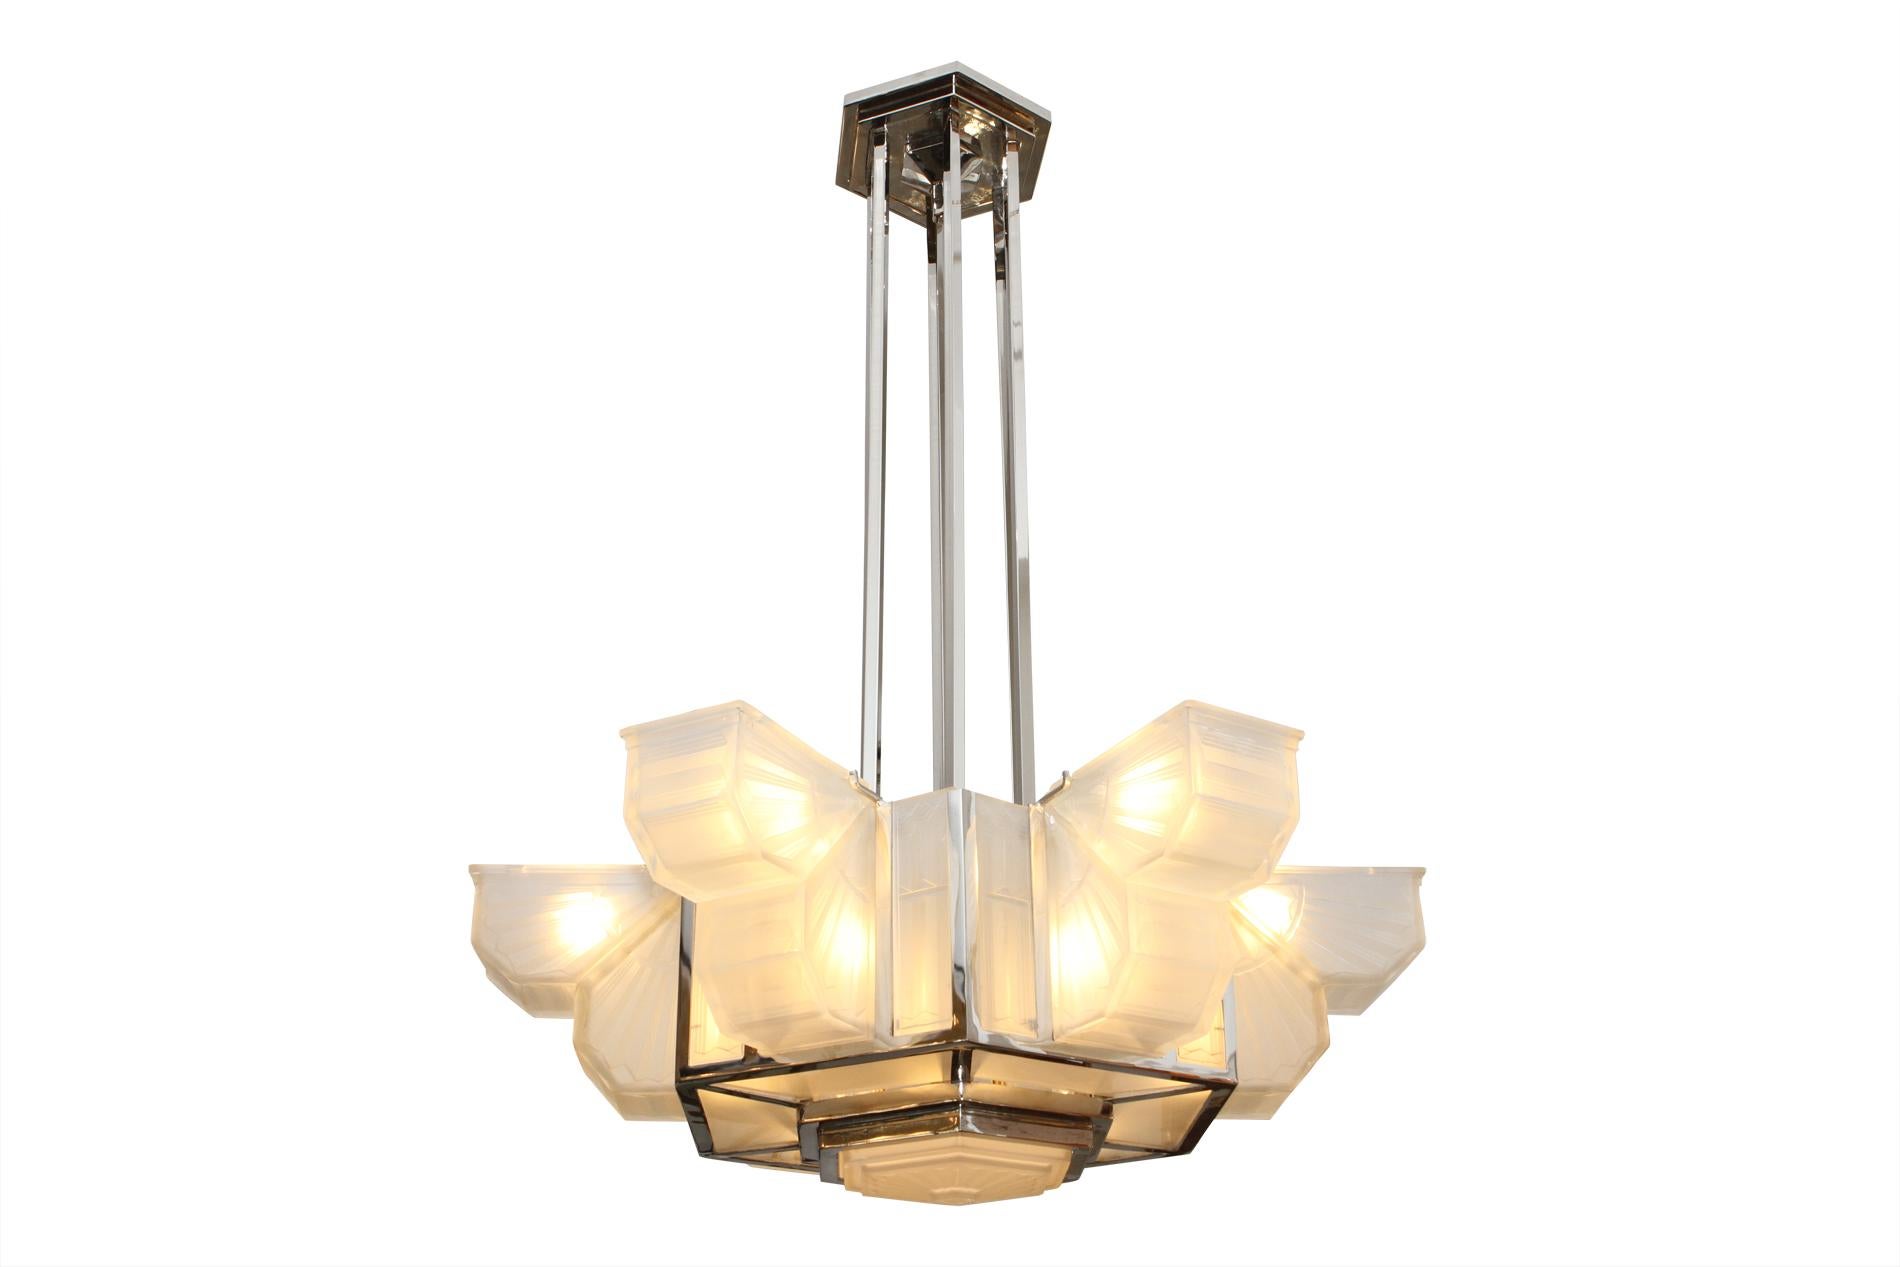 Really important and exceptional french art deco chandelier made by Hettier & Vincent in collaboration with the manufacture Des Hanots in 1930. The particularity of this piece is to be unique, everything has been made to order, it's the only one in